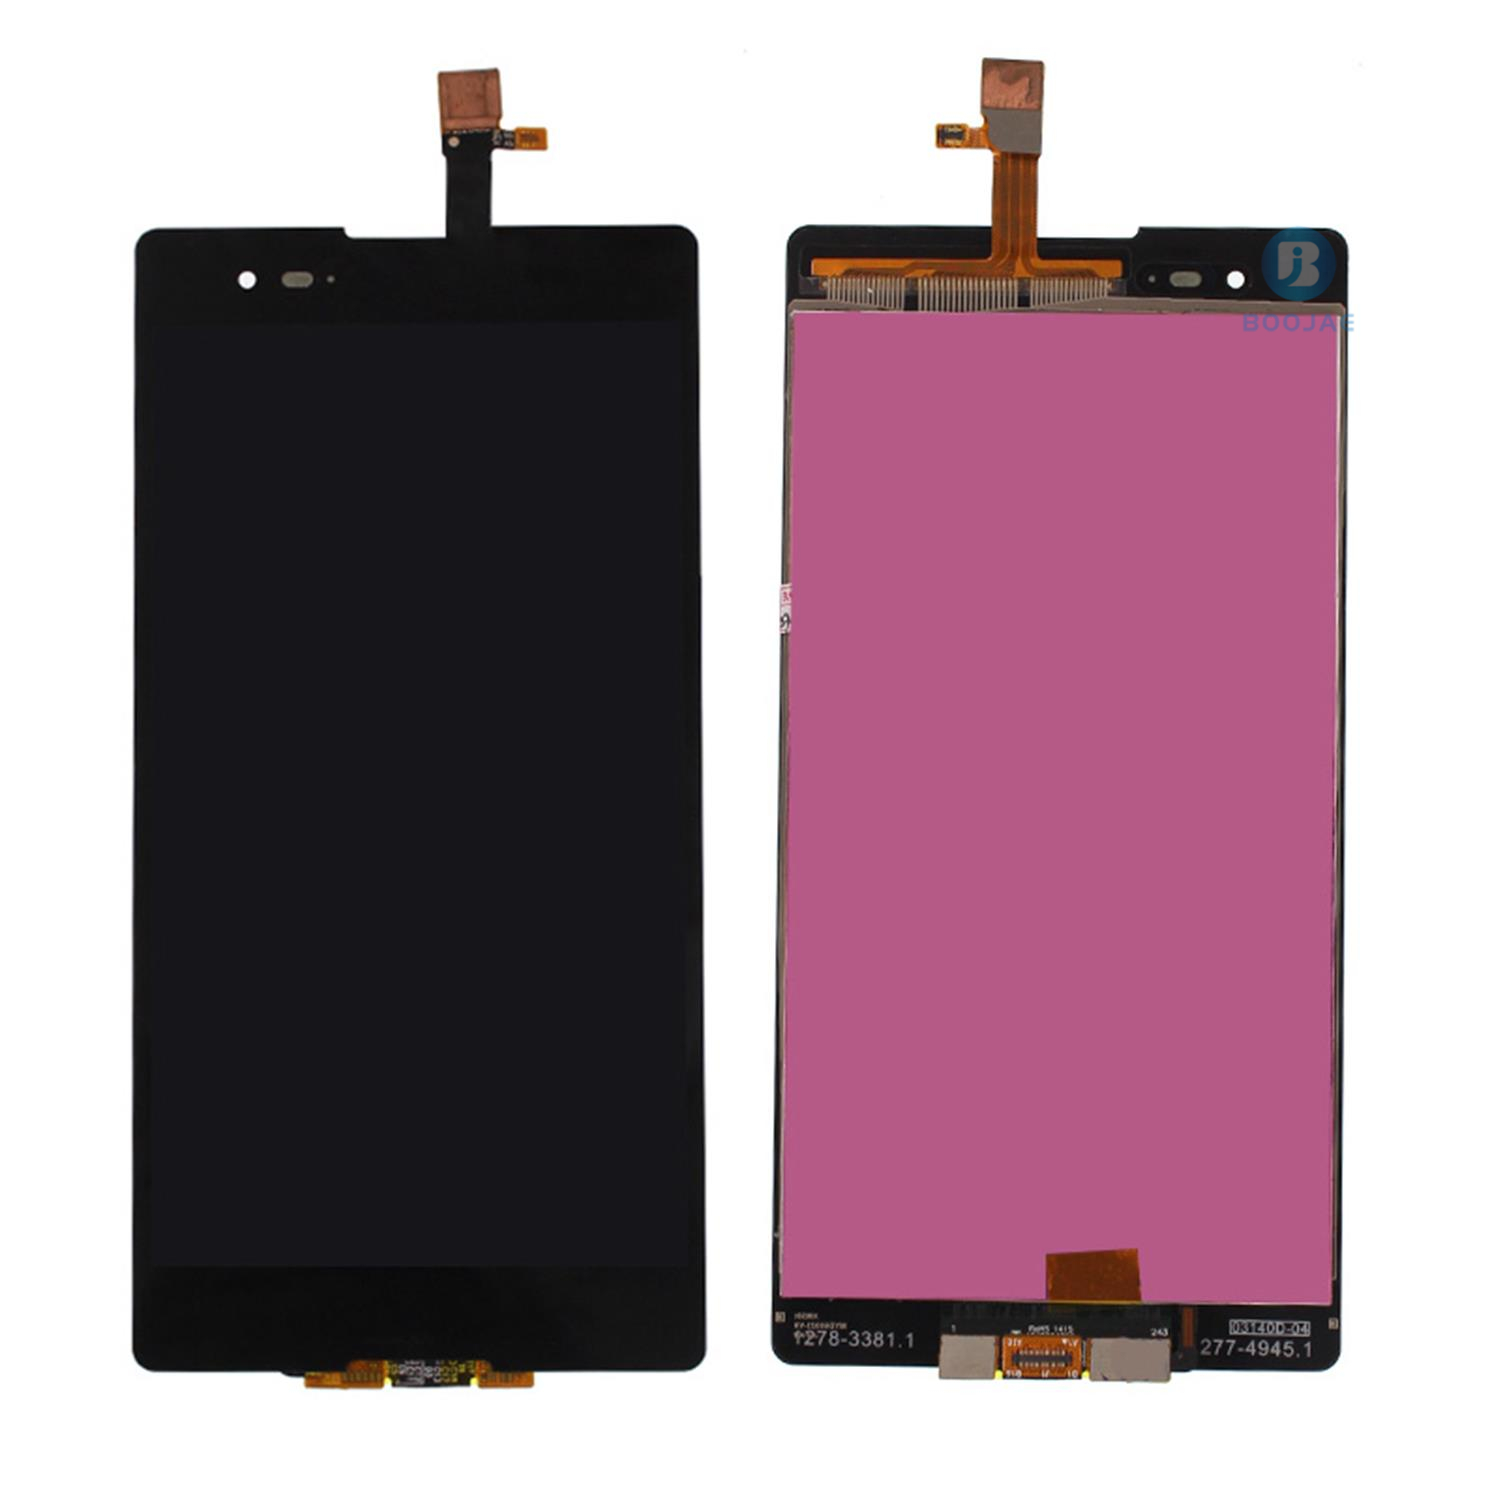 For Sony Xperia T2 Ultra LCD Screen Display and Touch Panel Digitizer Assembly Replacement